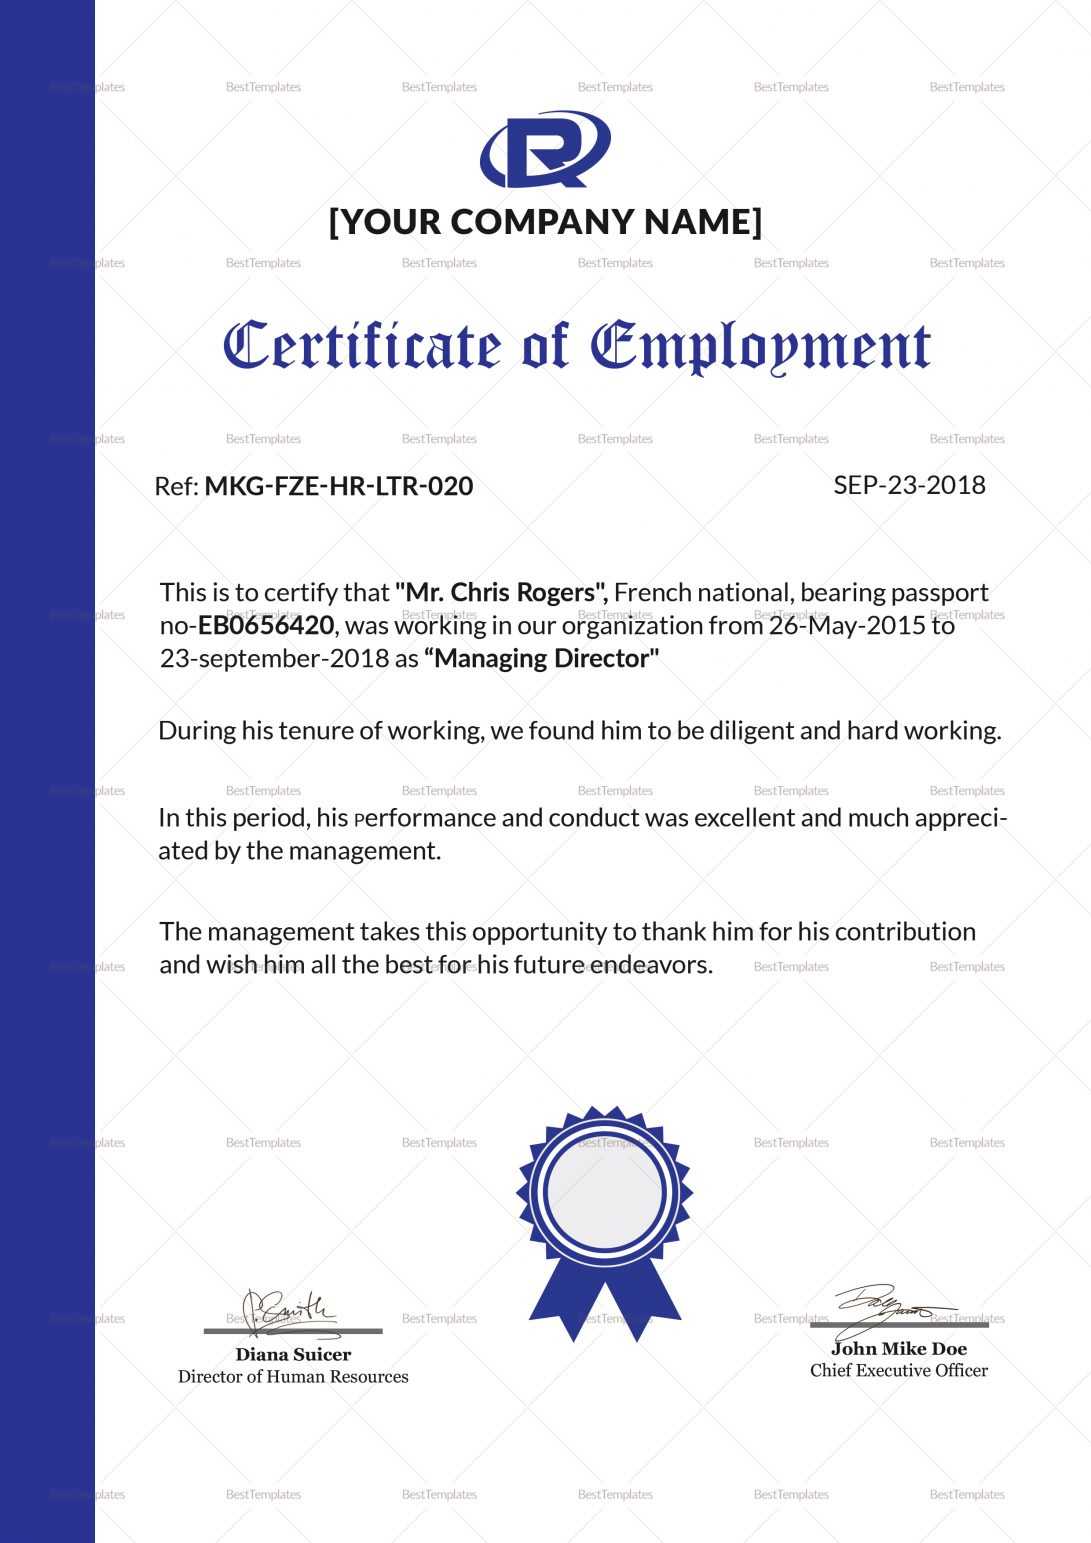 Sample Certificate Of Employment Template Request Letter For With Regard To Certificate Of Employment Template